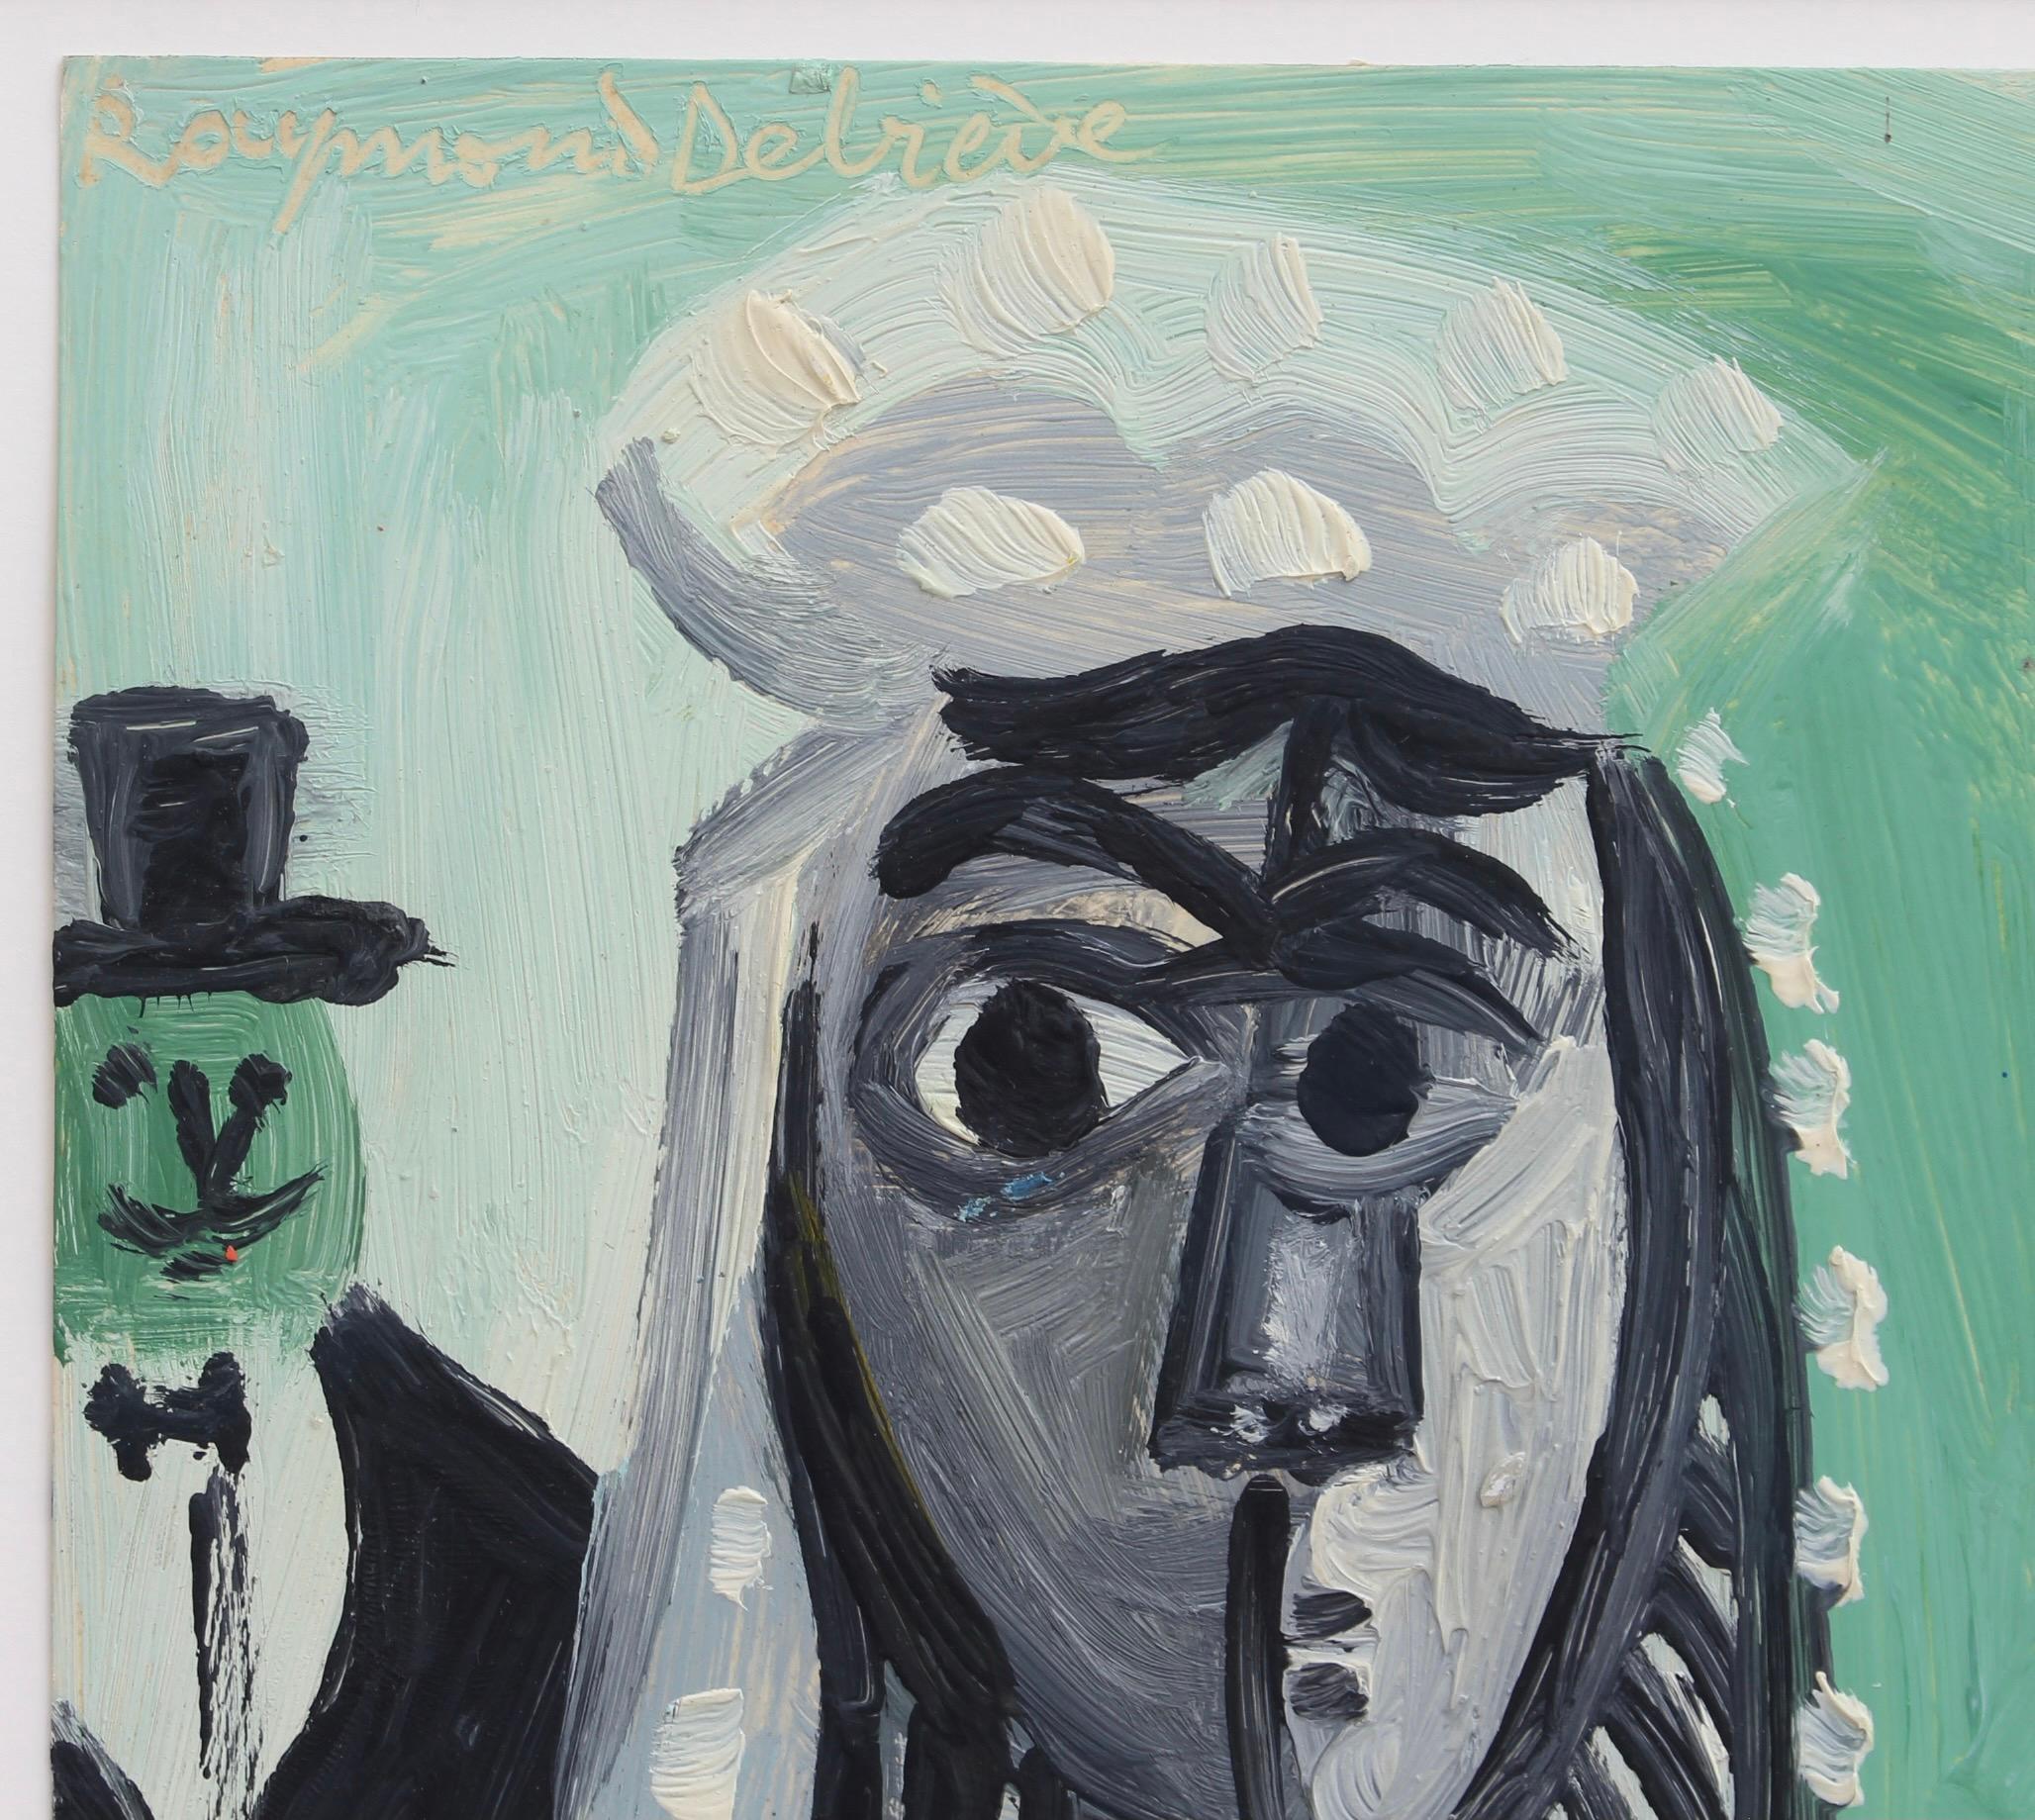 'The Wedding' oil on cardstock paper, by Raymond Debiève (1972). A quirky portrait of a young bride with the groom (or is it her father?) in the background. Her expression is bewildering. The artist's use of a green wedding dress is also mysterious.